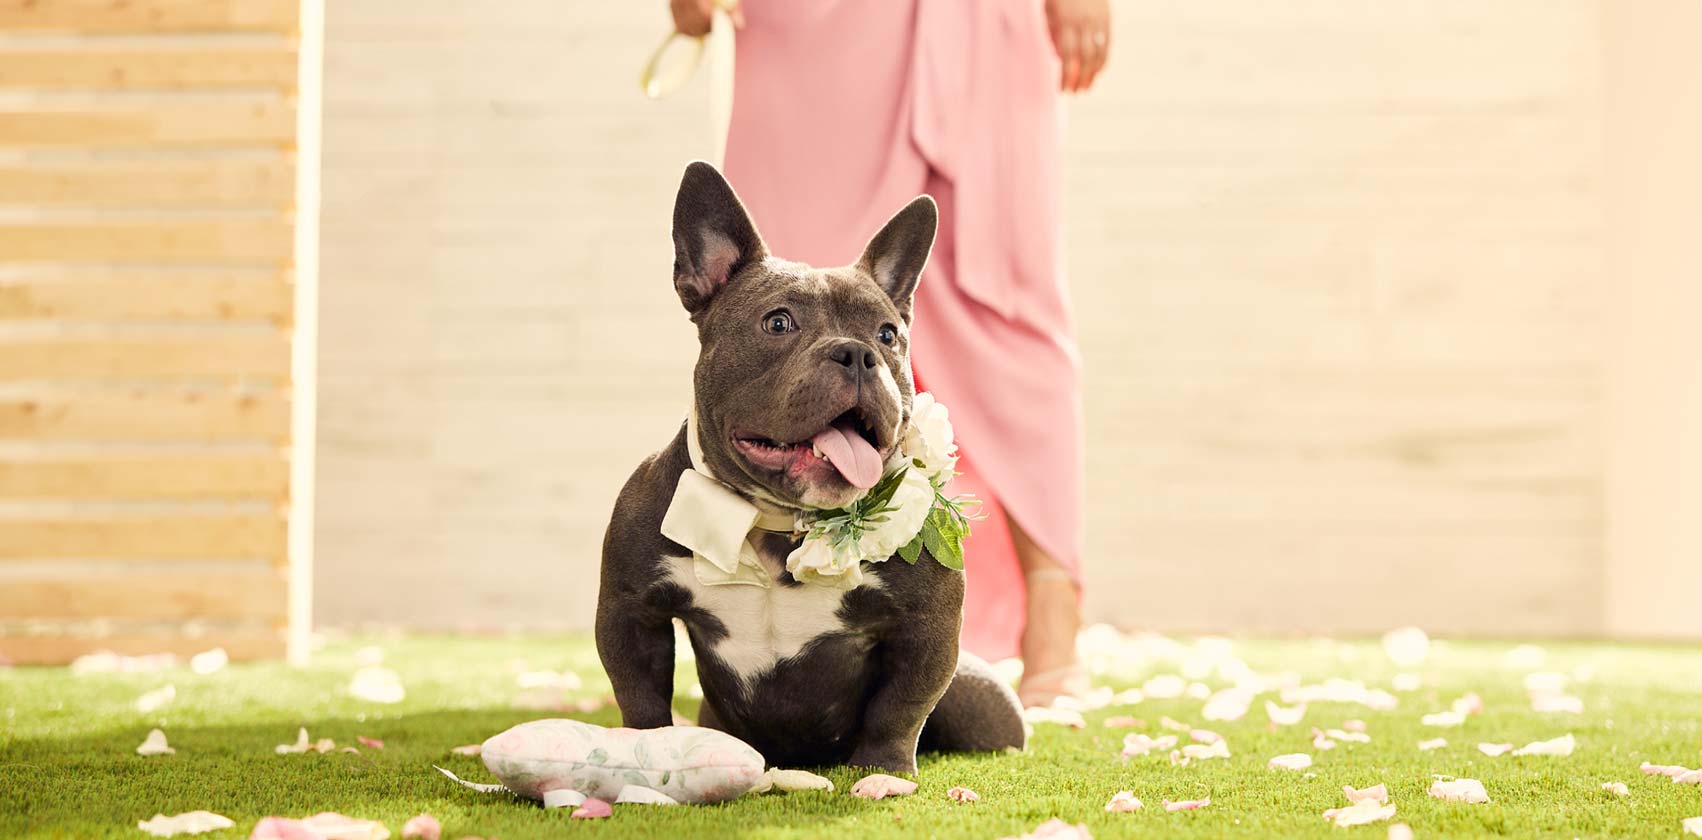 A dog sitting in front of his owner in a wedding